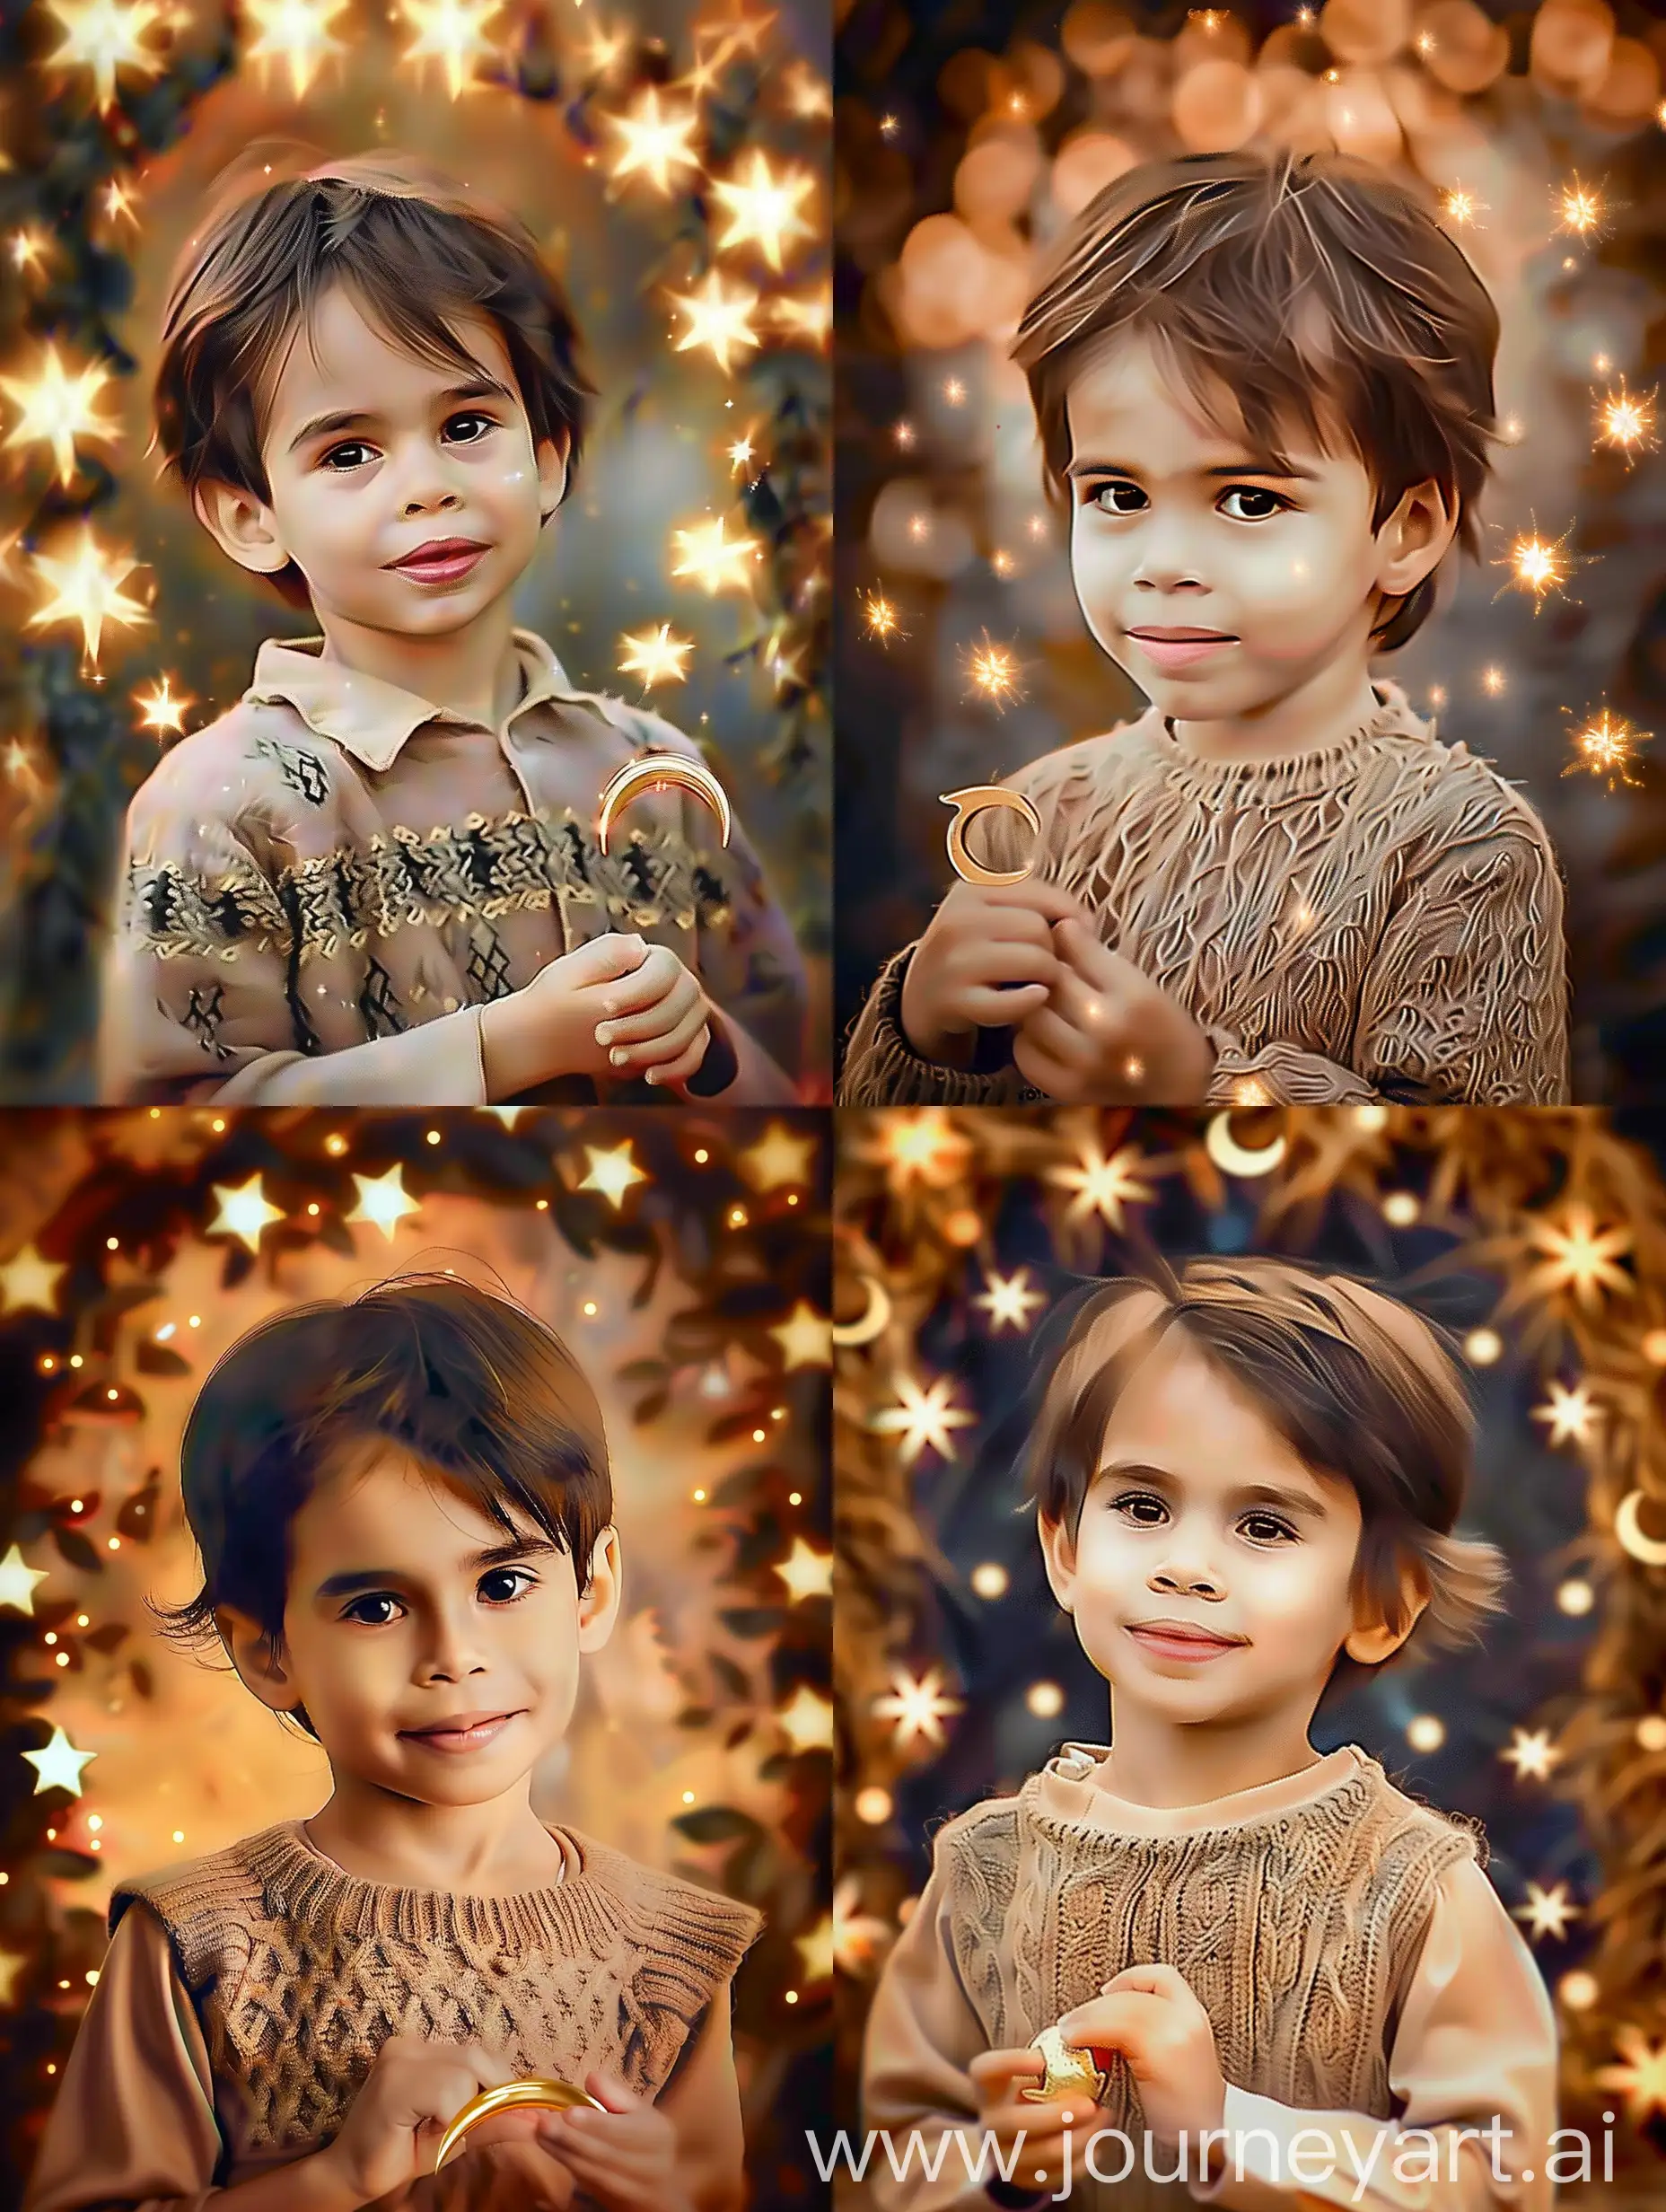 A three-year-old boy wearing a woolen dress with a beautiful weave, and in the evening air, many five-pointed stars shine behind him in golden color, the space around the boy is full of bright wreaths, and the boy is a small bright golden crescent moon.  He is holding it in his hand and smiling sweetly